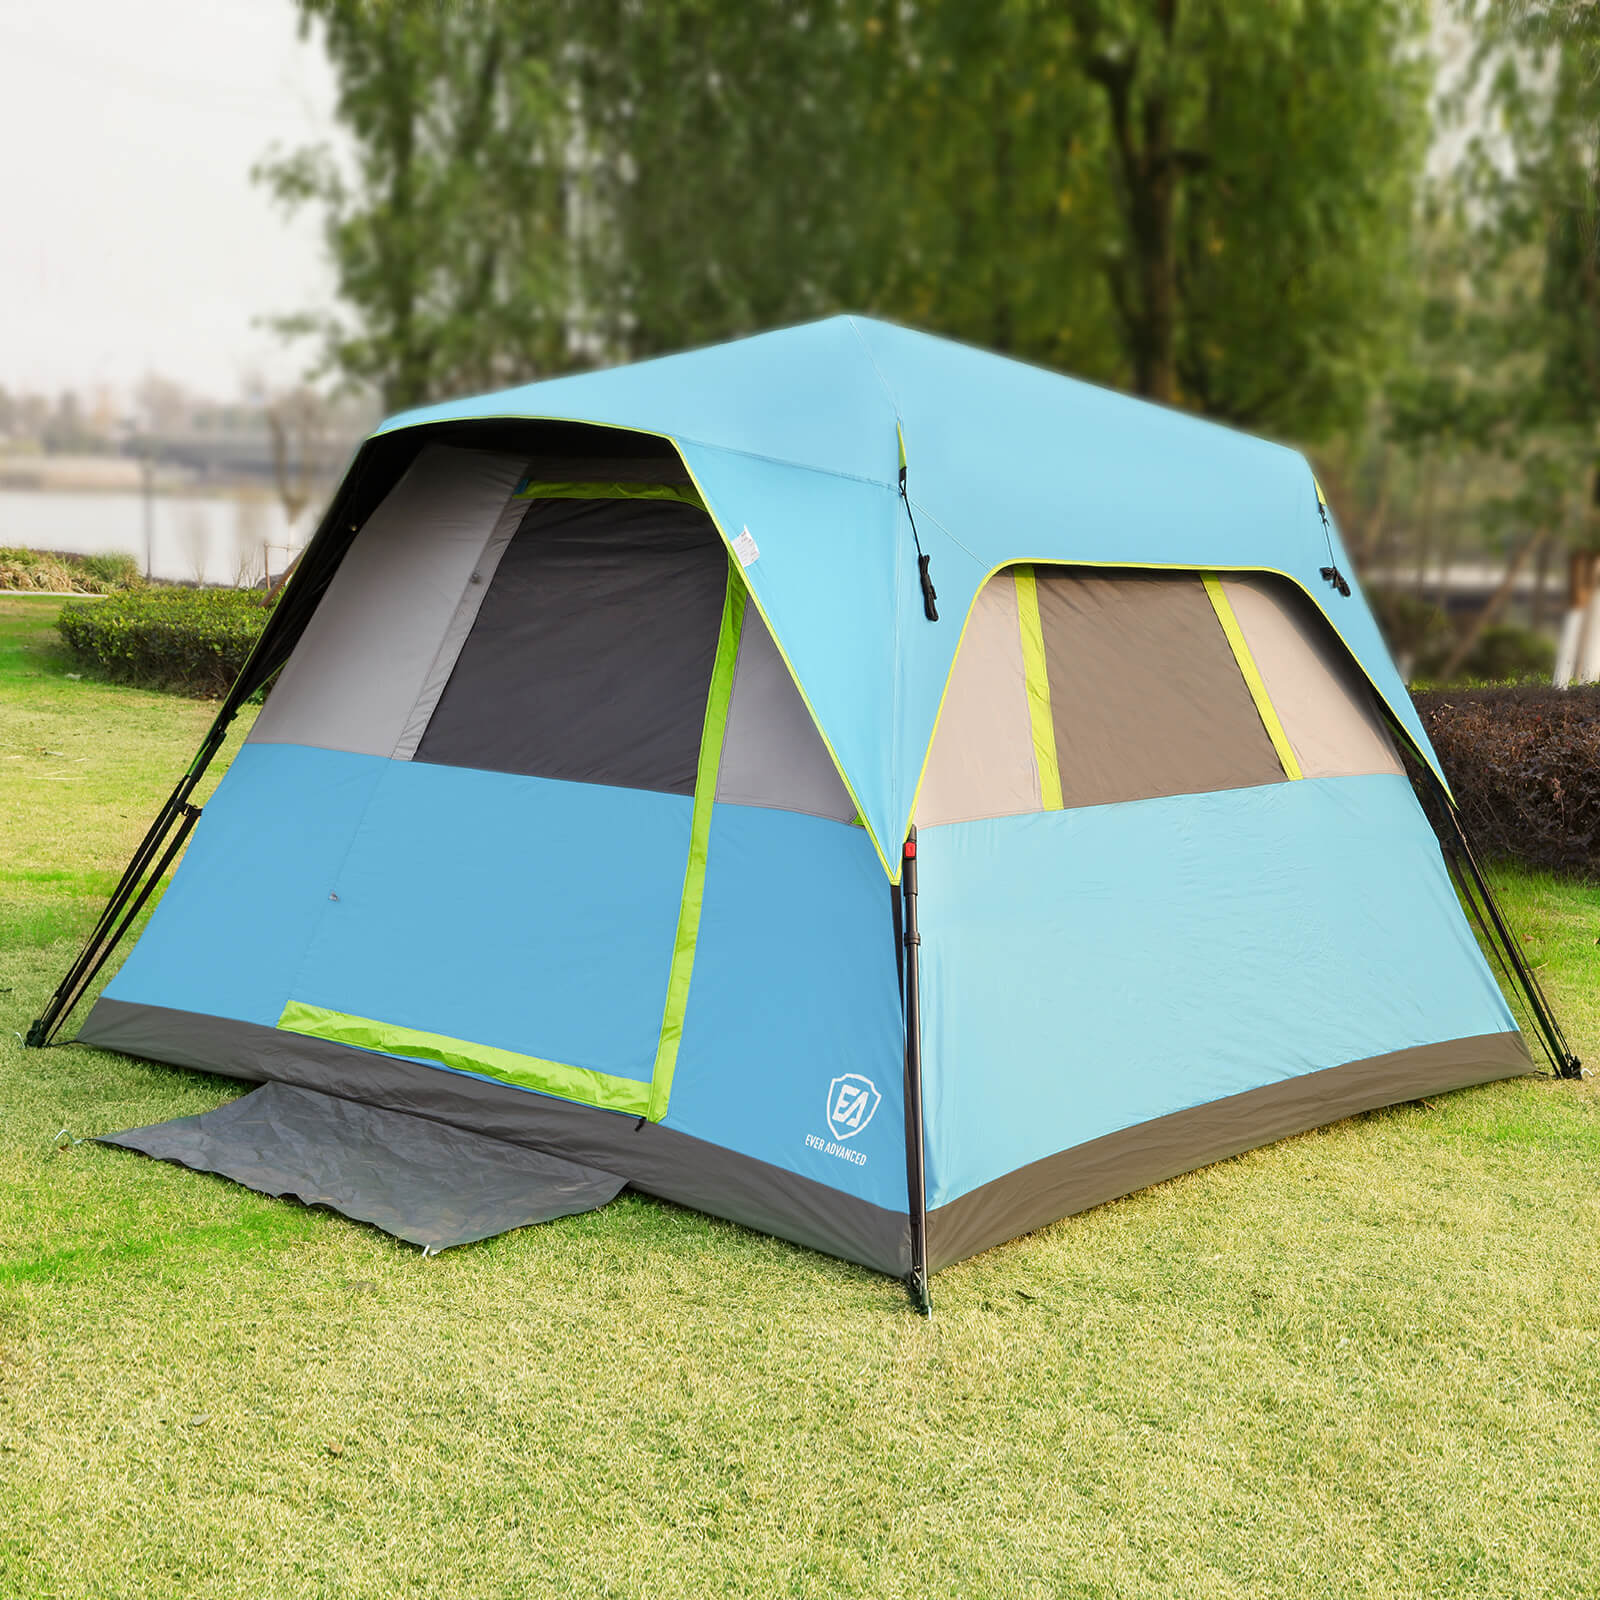 EverAdvanced 6 Person Instant Blackout Camping Tent 